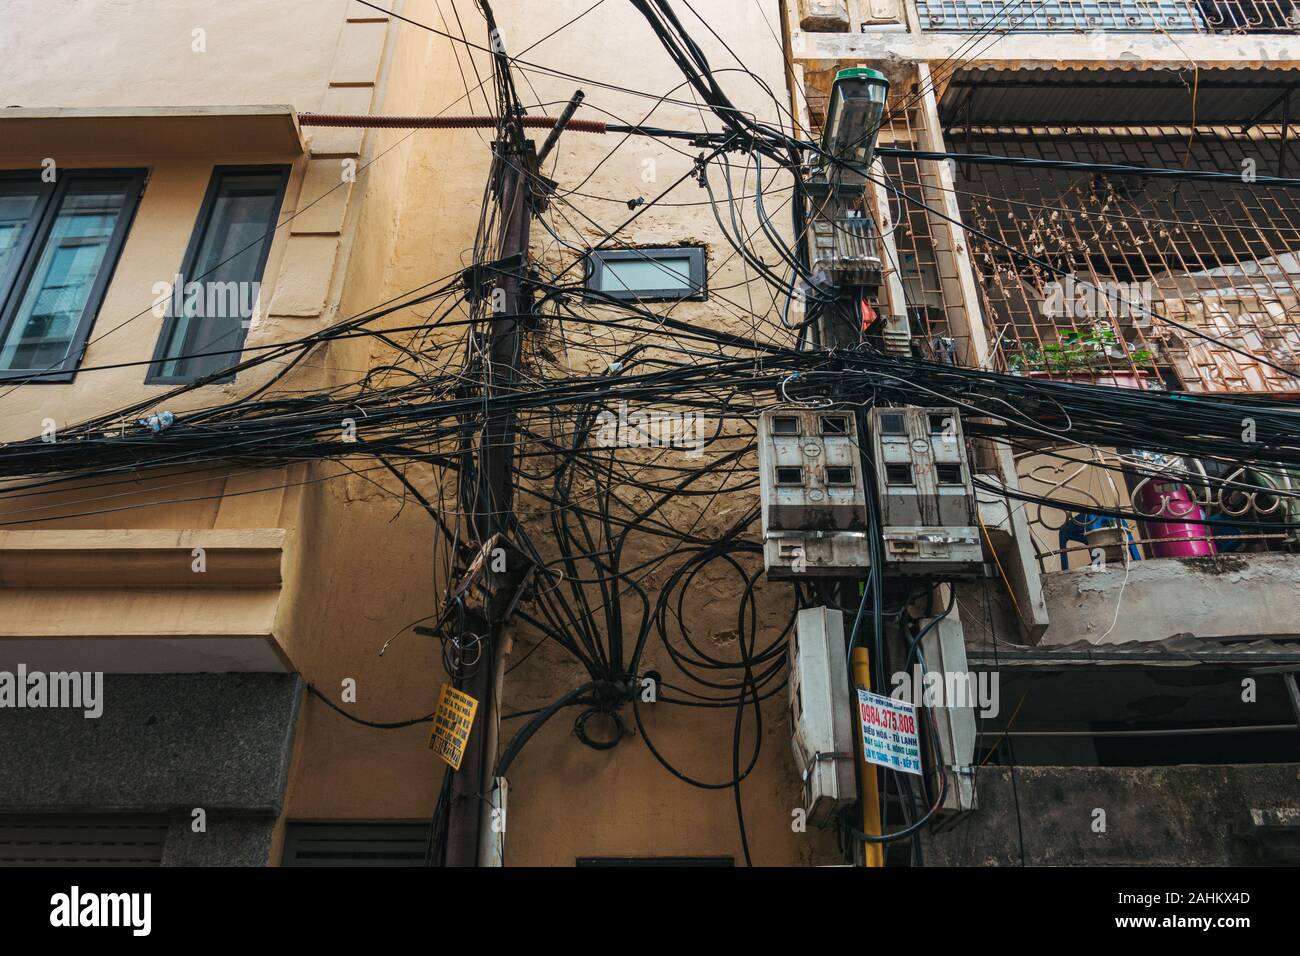 A sprawling tangle of residential power lines and internet cables in Hanoi, Vietnam Stock Photo